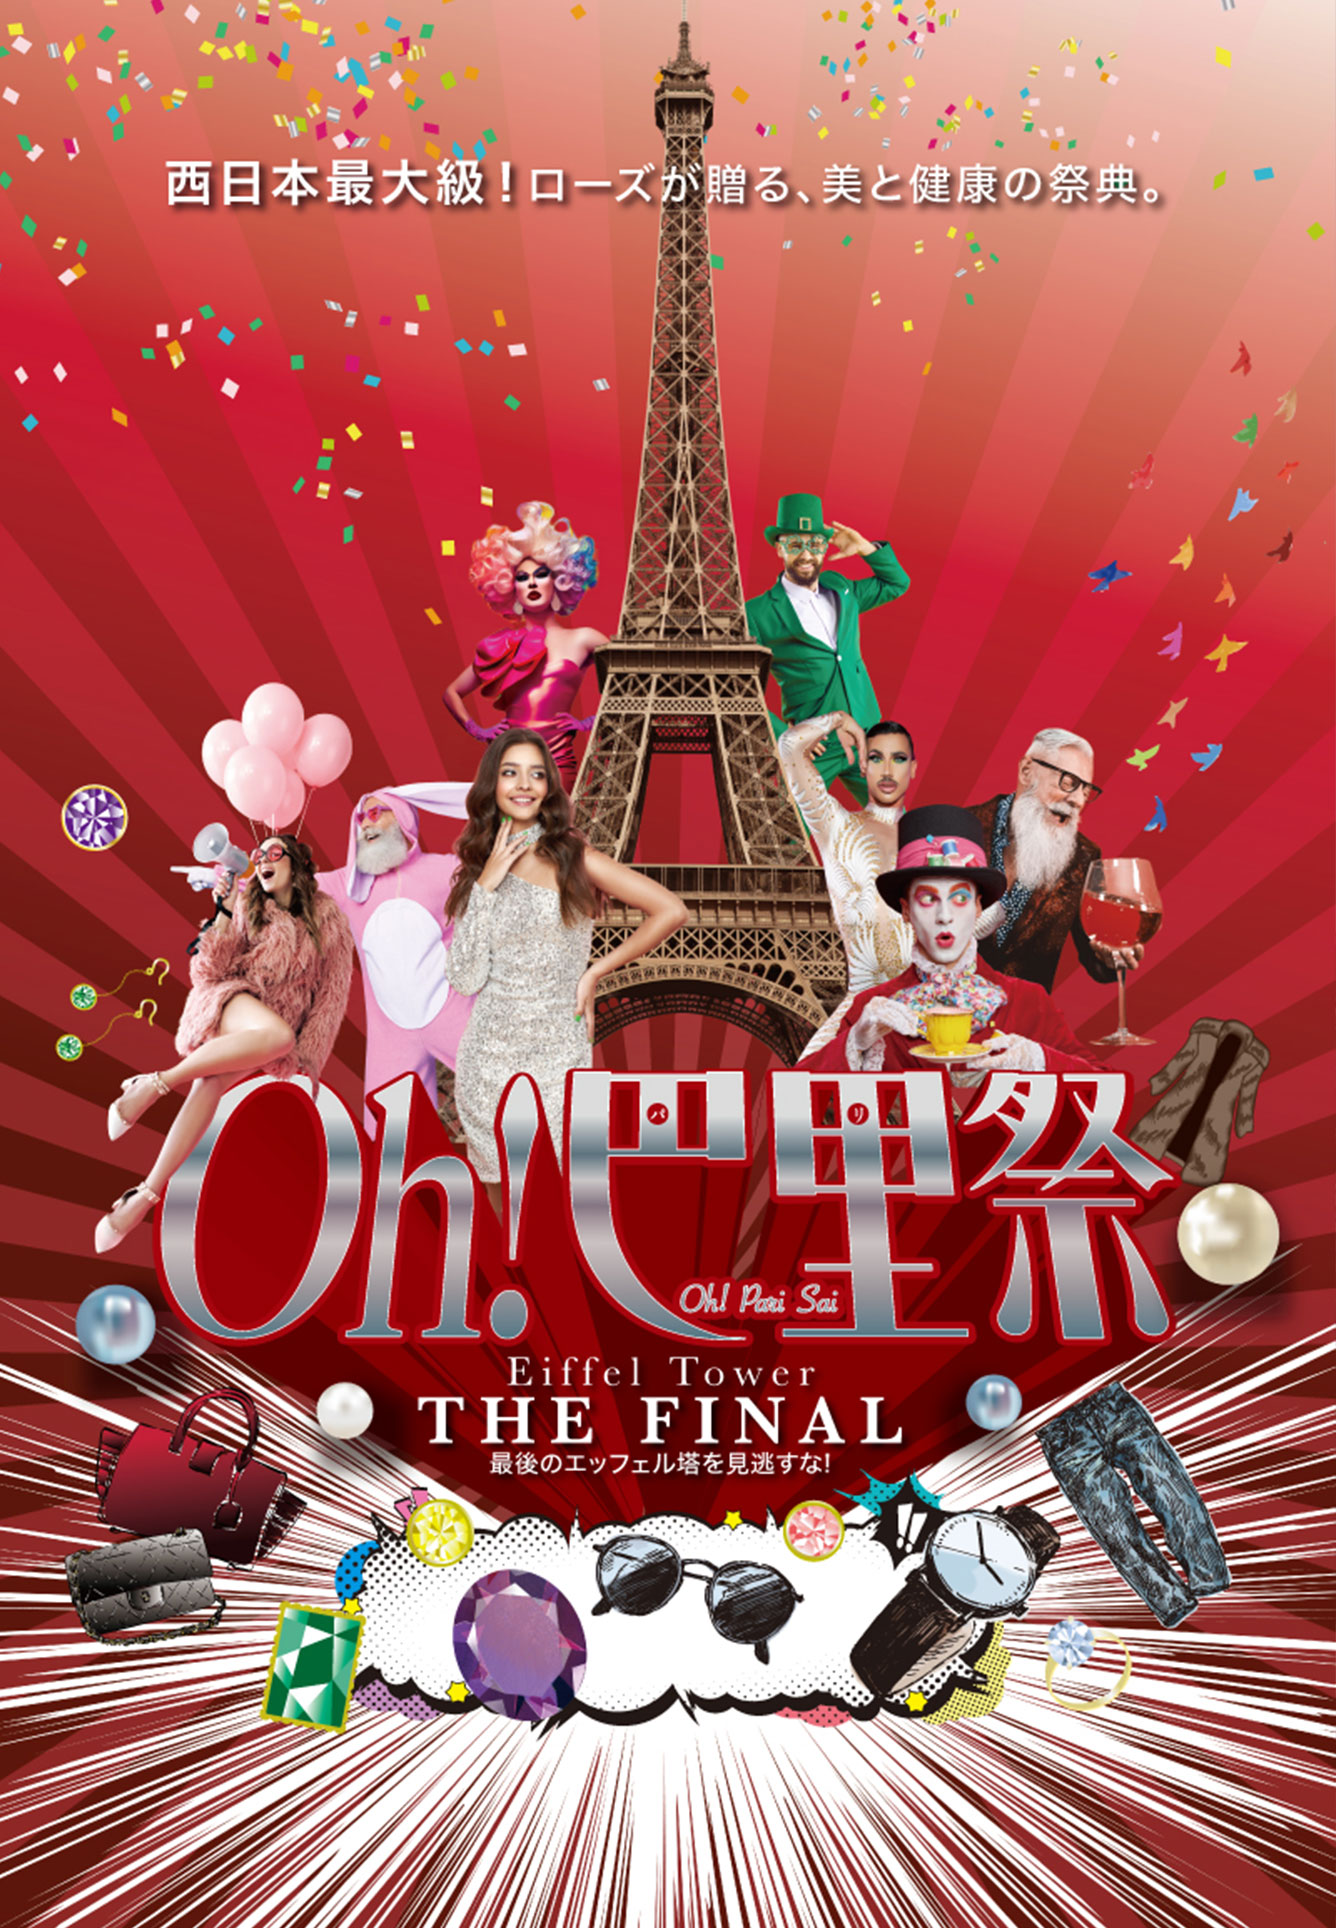 OH!巴里祭 THE FINAL